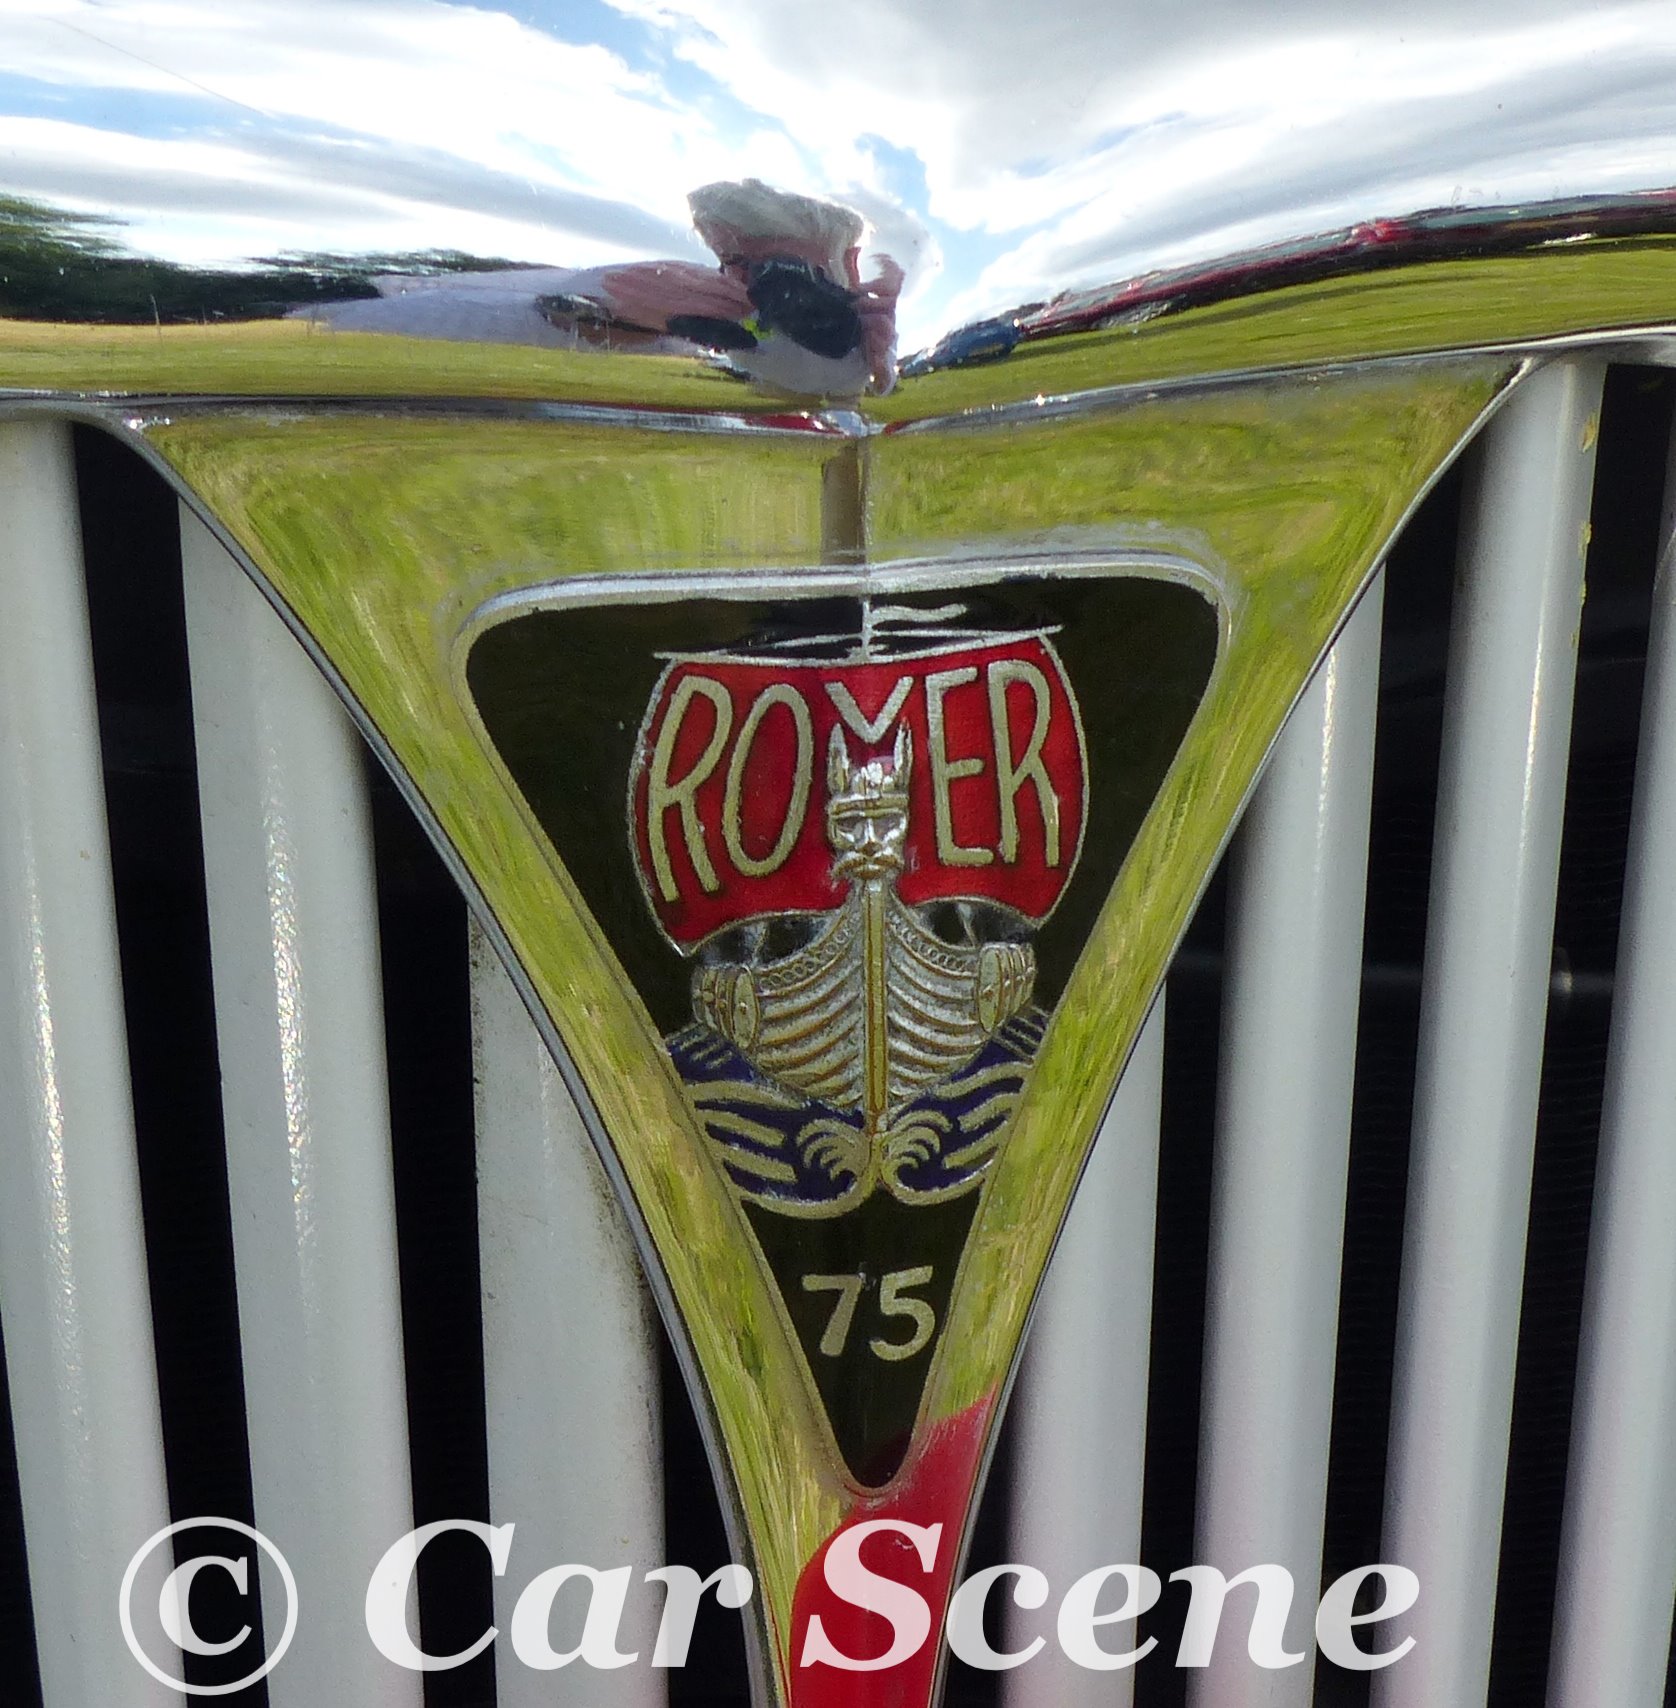 1949 Rover 75 (P3) grille badge